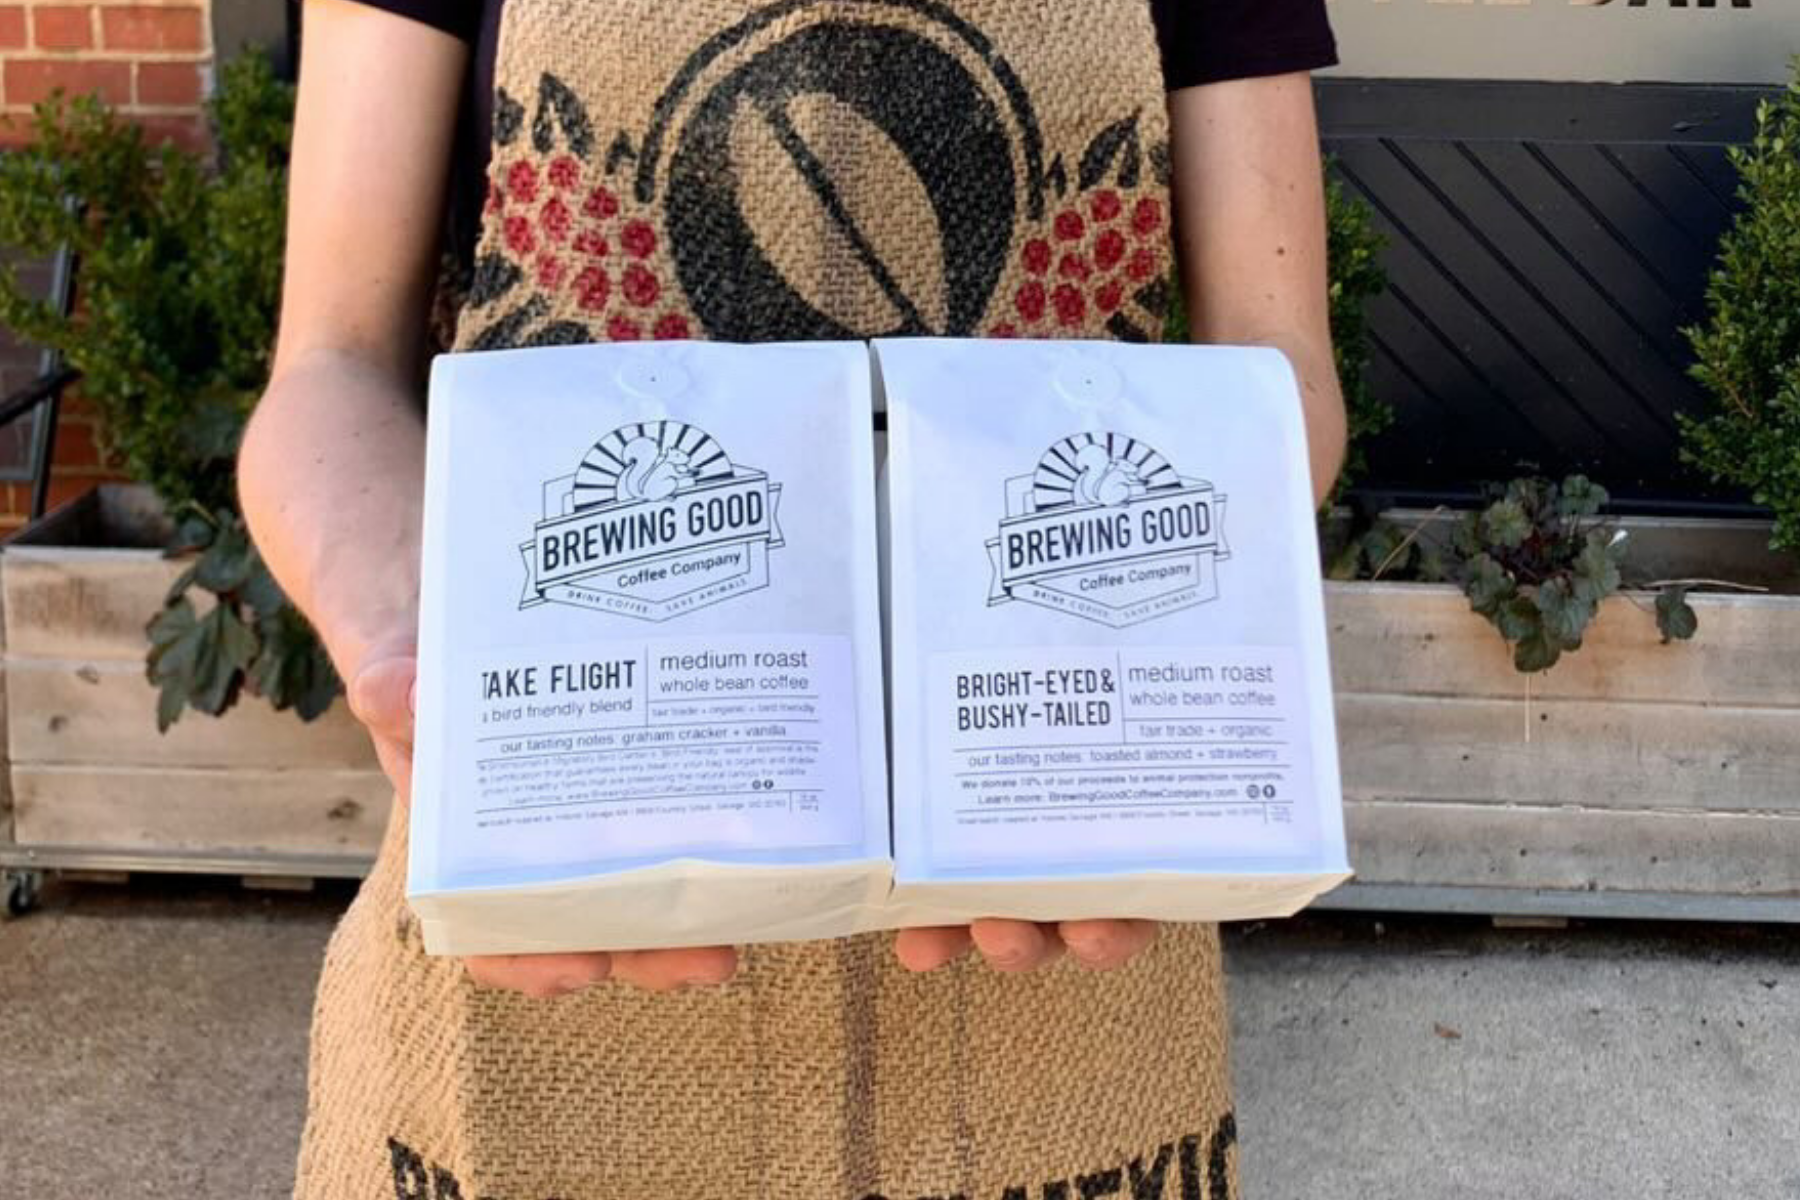 A person is holding two bags of Brewing Good Coffee Company coffee